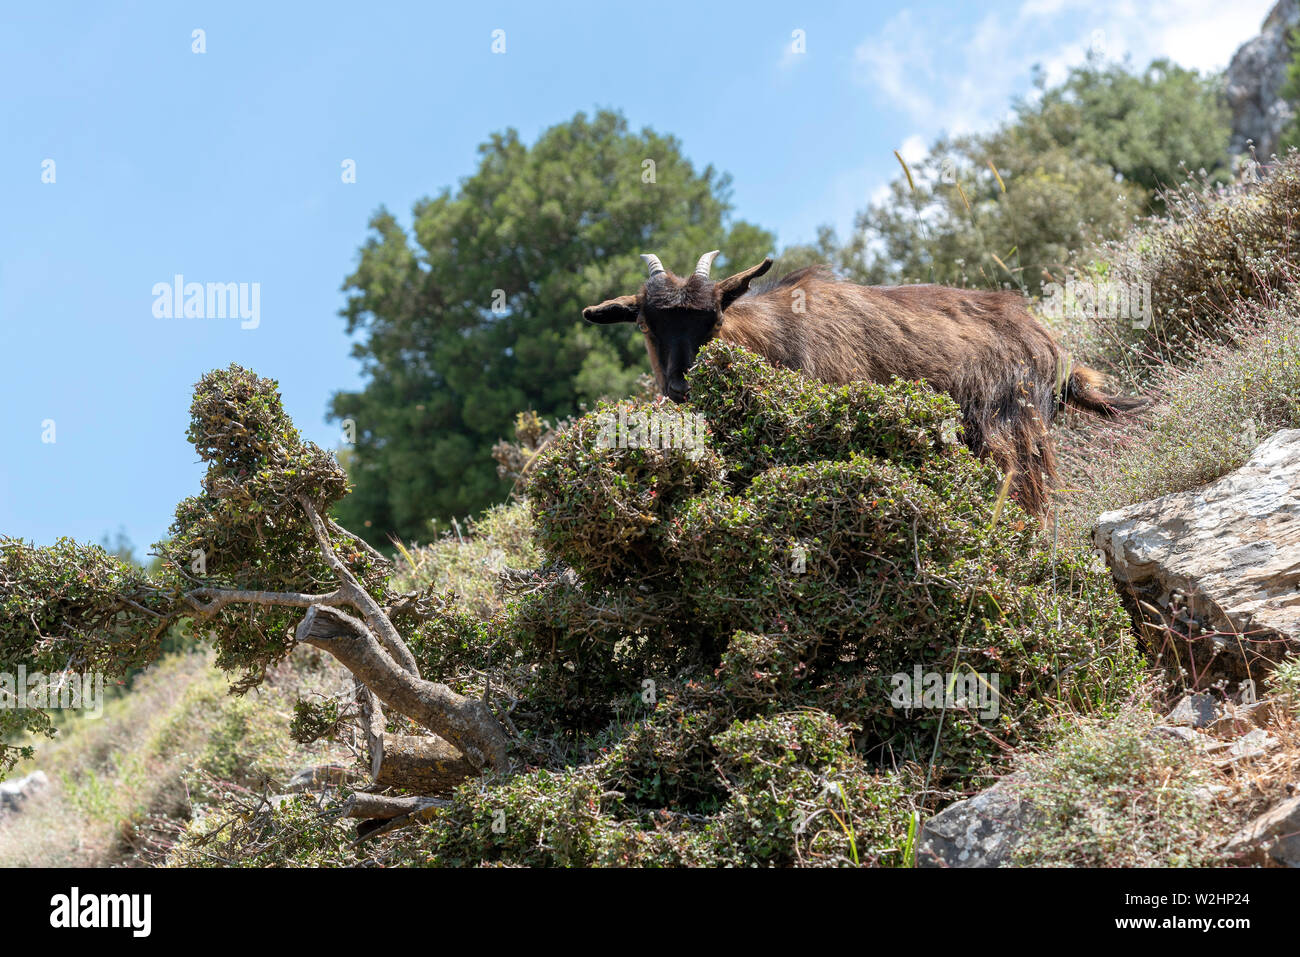 Crete, Greece. June 2019. A Cretan mountain goat with a bell around its neck standing alone  mountaintside. Stock Photo